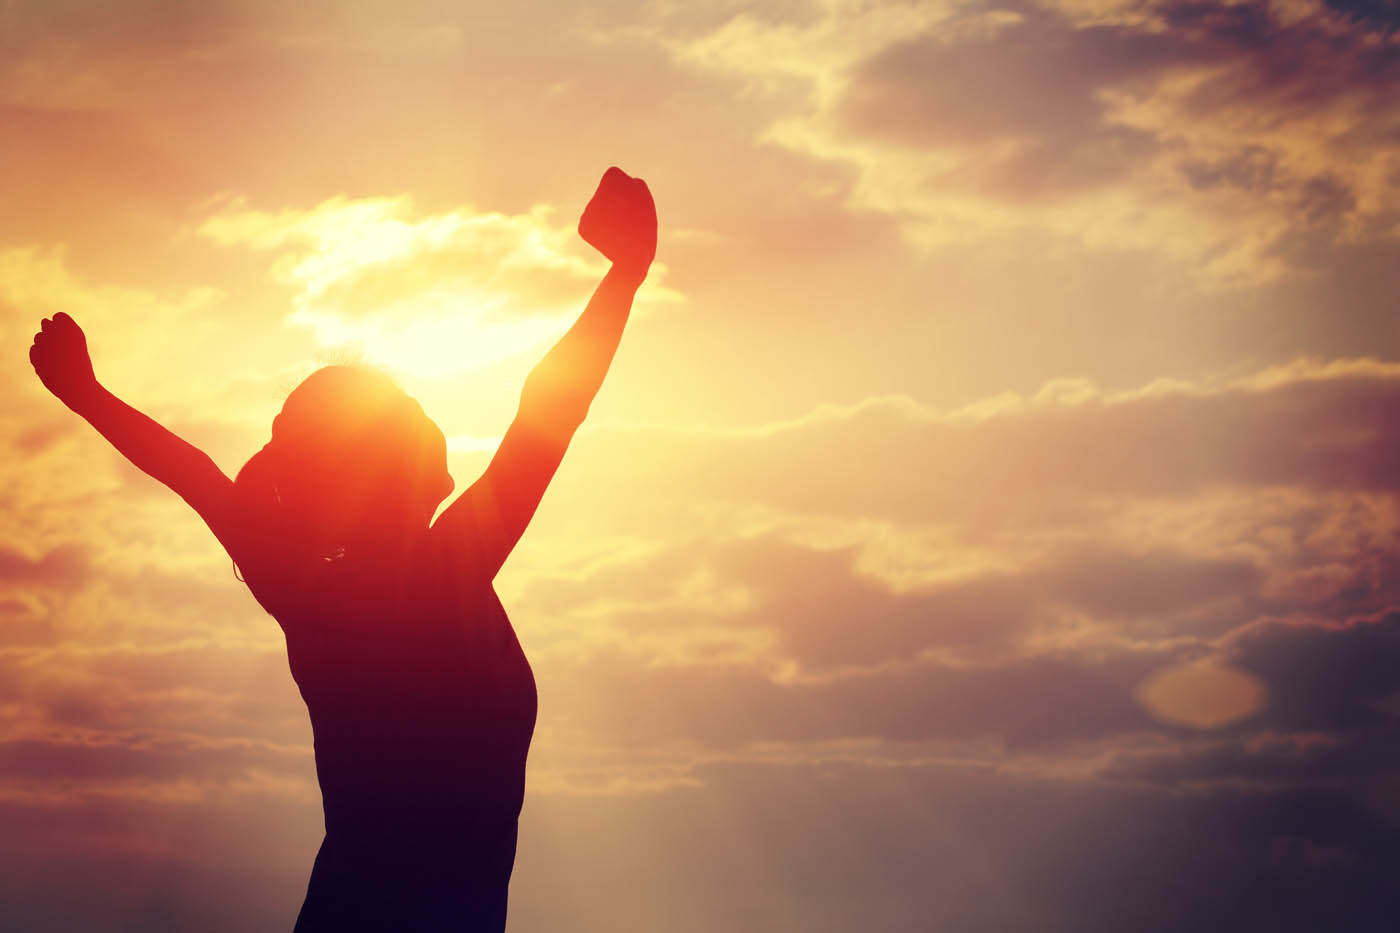 A woman standing in the light with her arms up in the air - learn how you can get relief with Light Lounge's back pain management in Arvada, CO.